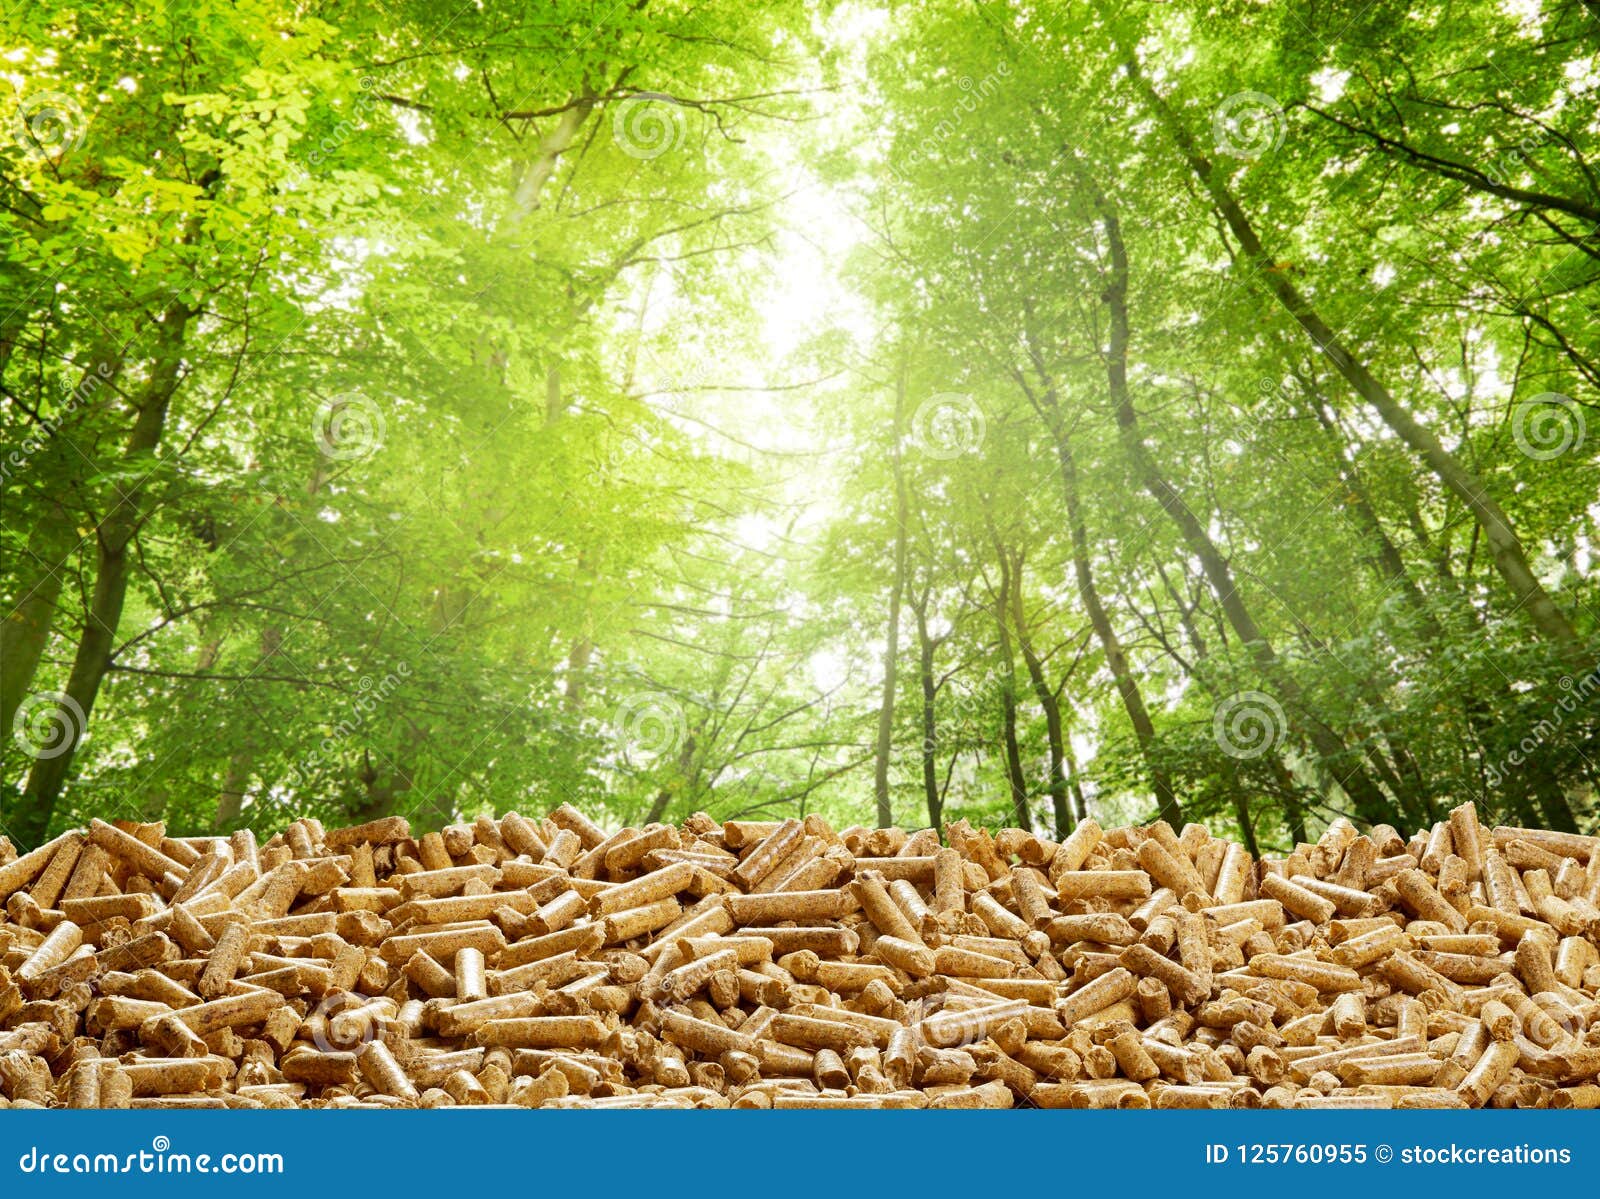 layer of organic wood pellets in a green forest